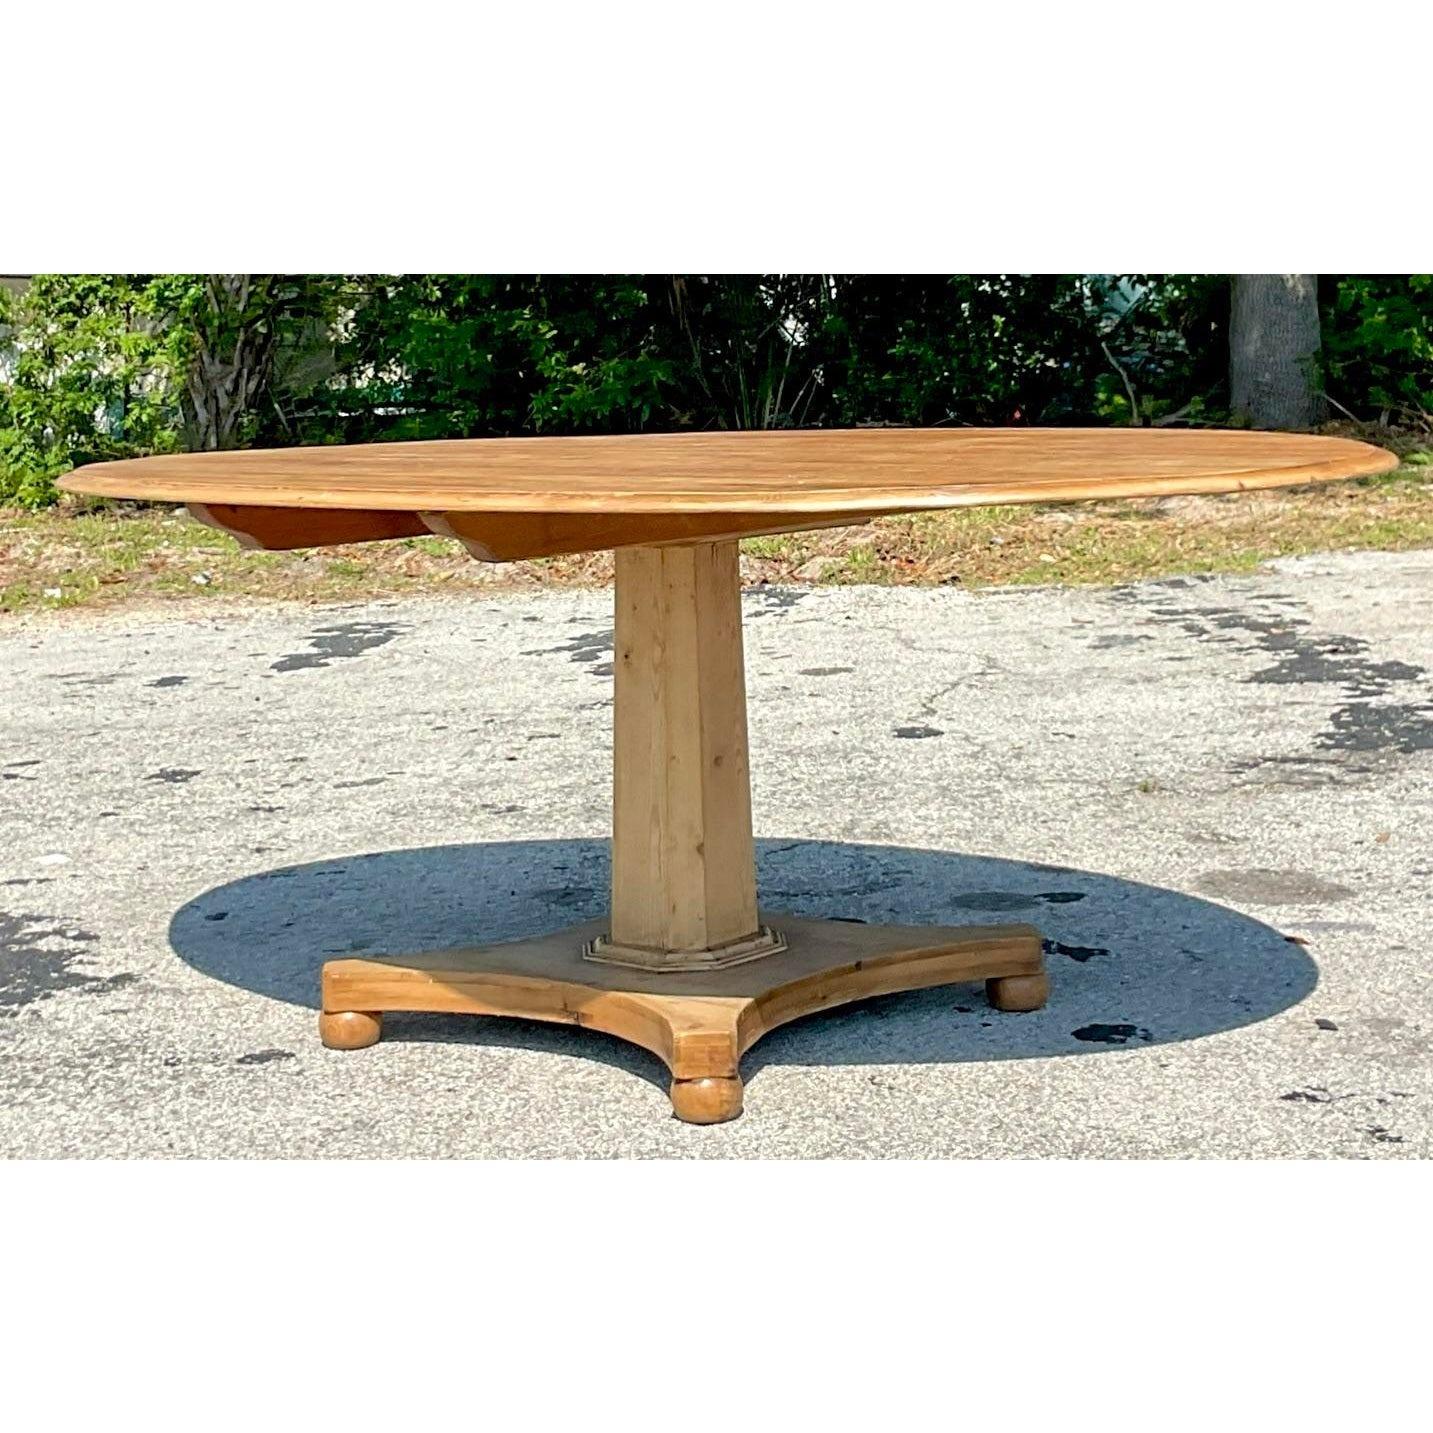 North American Late 20th Century Vintage Boho Center Pedestal Oval Pine Dining Table